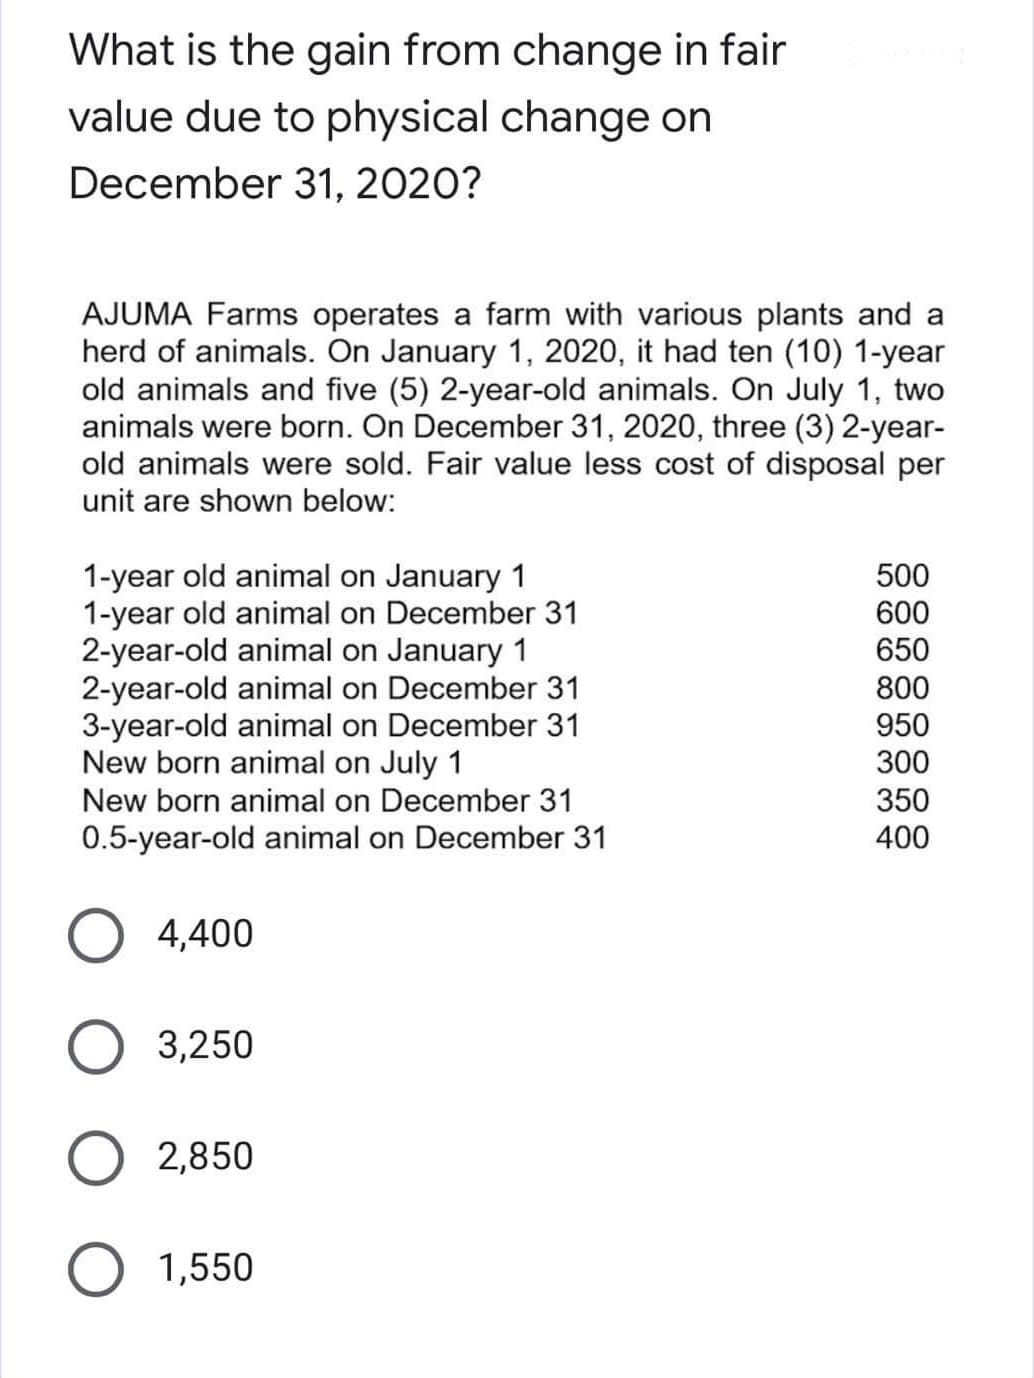 What is the gain from change in fair
value due to physical change on
December 31, 2020?
AJUMA Farms operates a farm with various plants and a
herd of animals. On January 1, 2020, it had ten (10) 1-year
old animals and five (5) 2-year-old animals. On July 1, two
animals were born. On December 31, 2020, three (3) 2-year-
old animals were sold. Fair value less cost of disposal per
unit are shown below:
1-year old animal on January 1
1-year old animal on December 31
2-year-old animal on January 1
2-year-old animal on December 31
3-year-old animal on December 31
New born animal on July 1
500
600
650
800
950
300
New born animal on December 31
350
0.5-year-old animal on December 31
400
4,400
O 3,250
O 2,850
O 1,550
